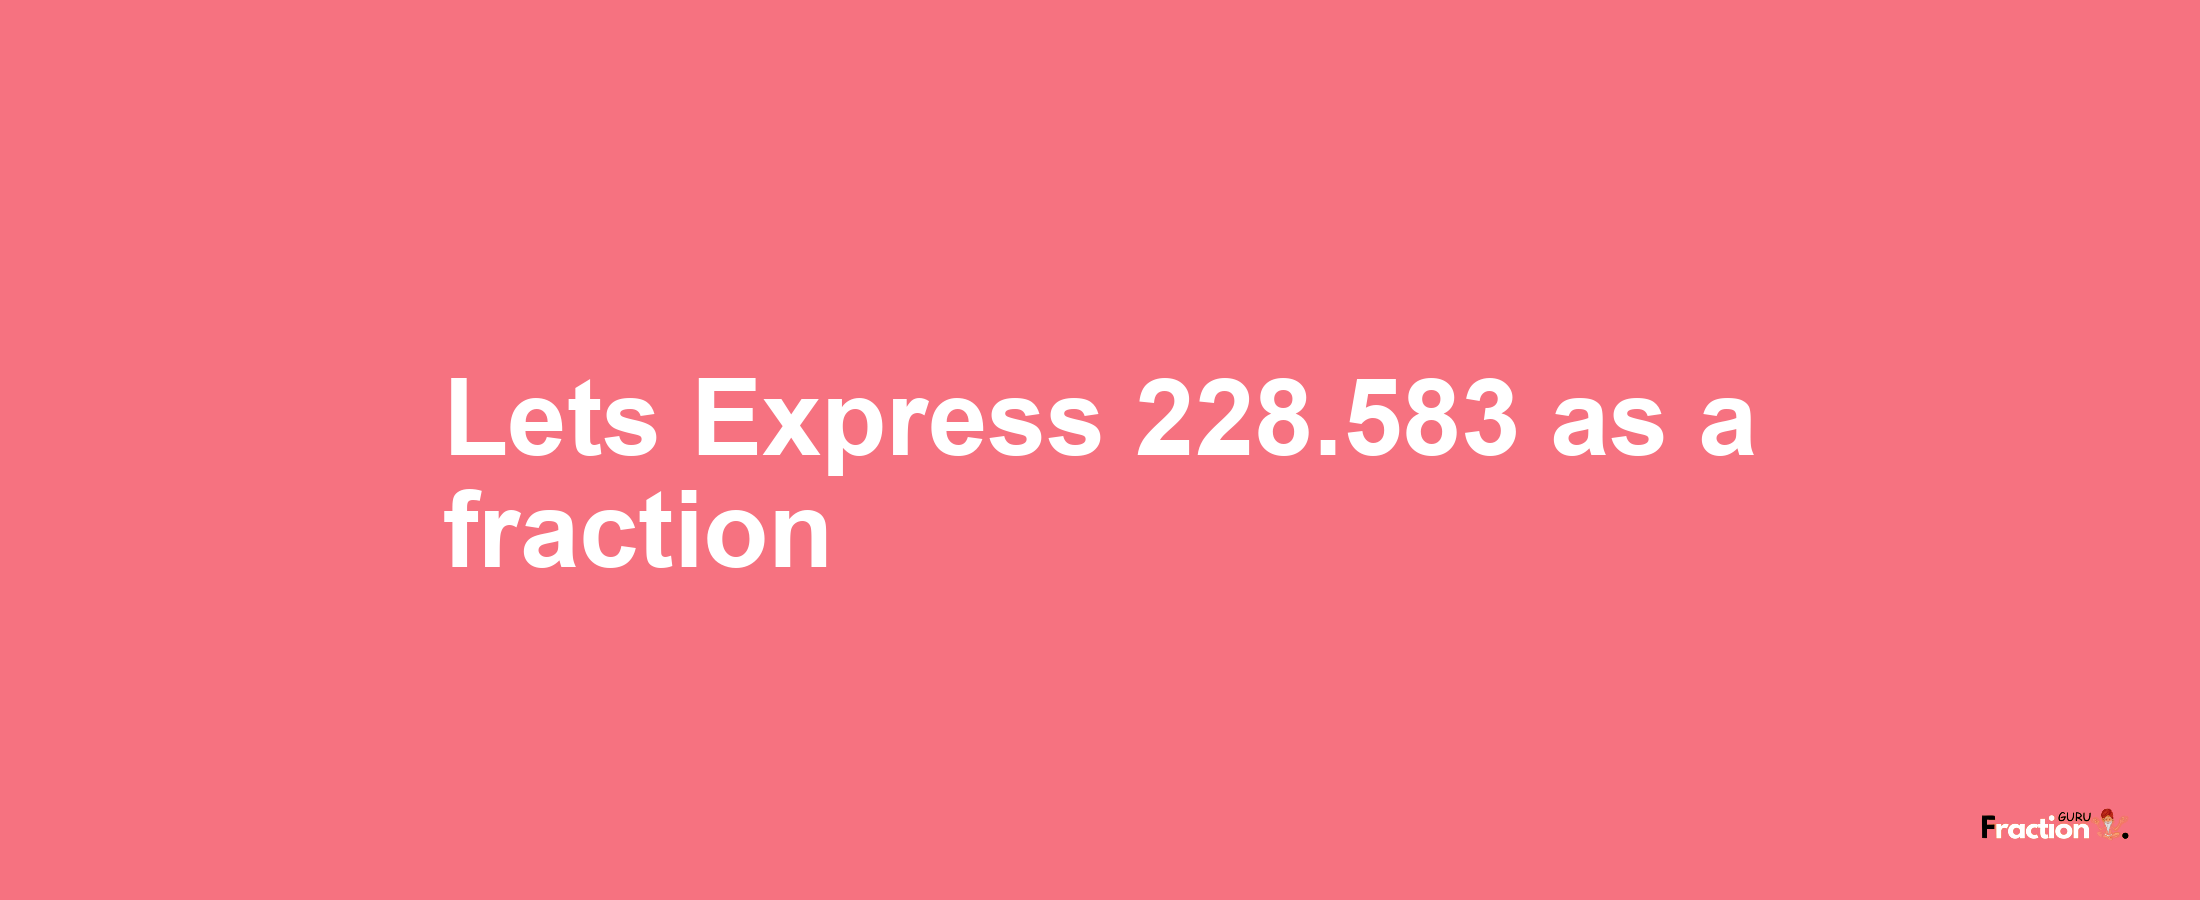 Lets Express 228.583 as afraction